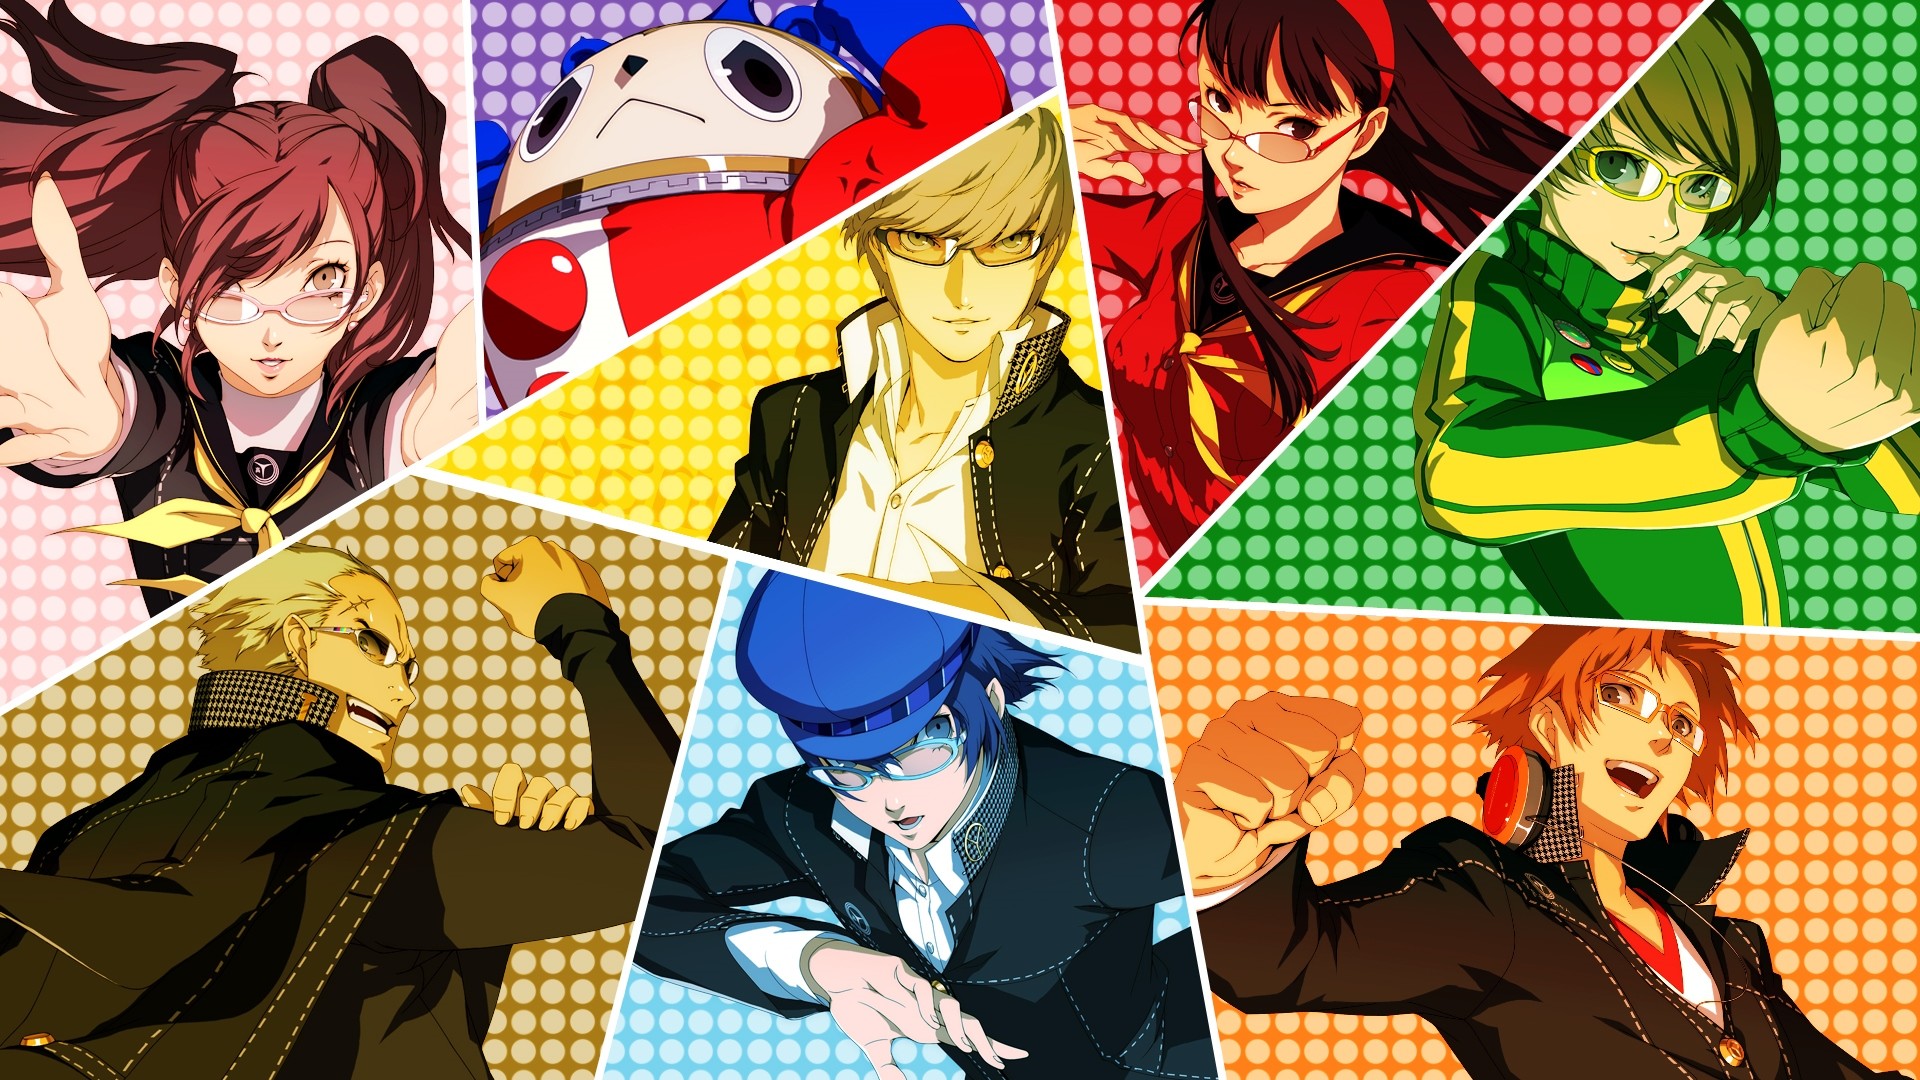 1920x1080 Persona 4 HD Wallpapers Download Free Persona 4 HD Wallpapers Free Download